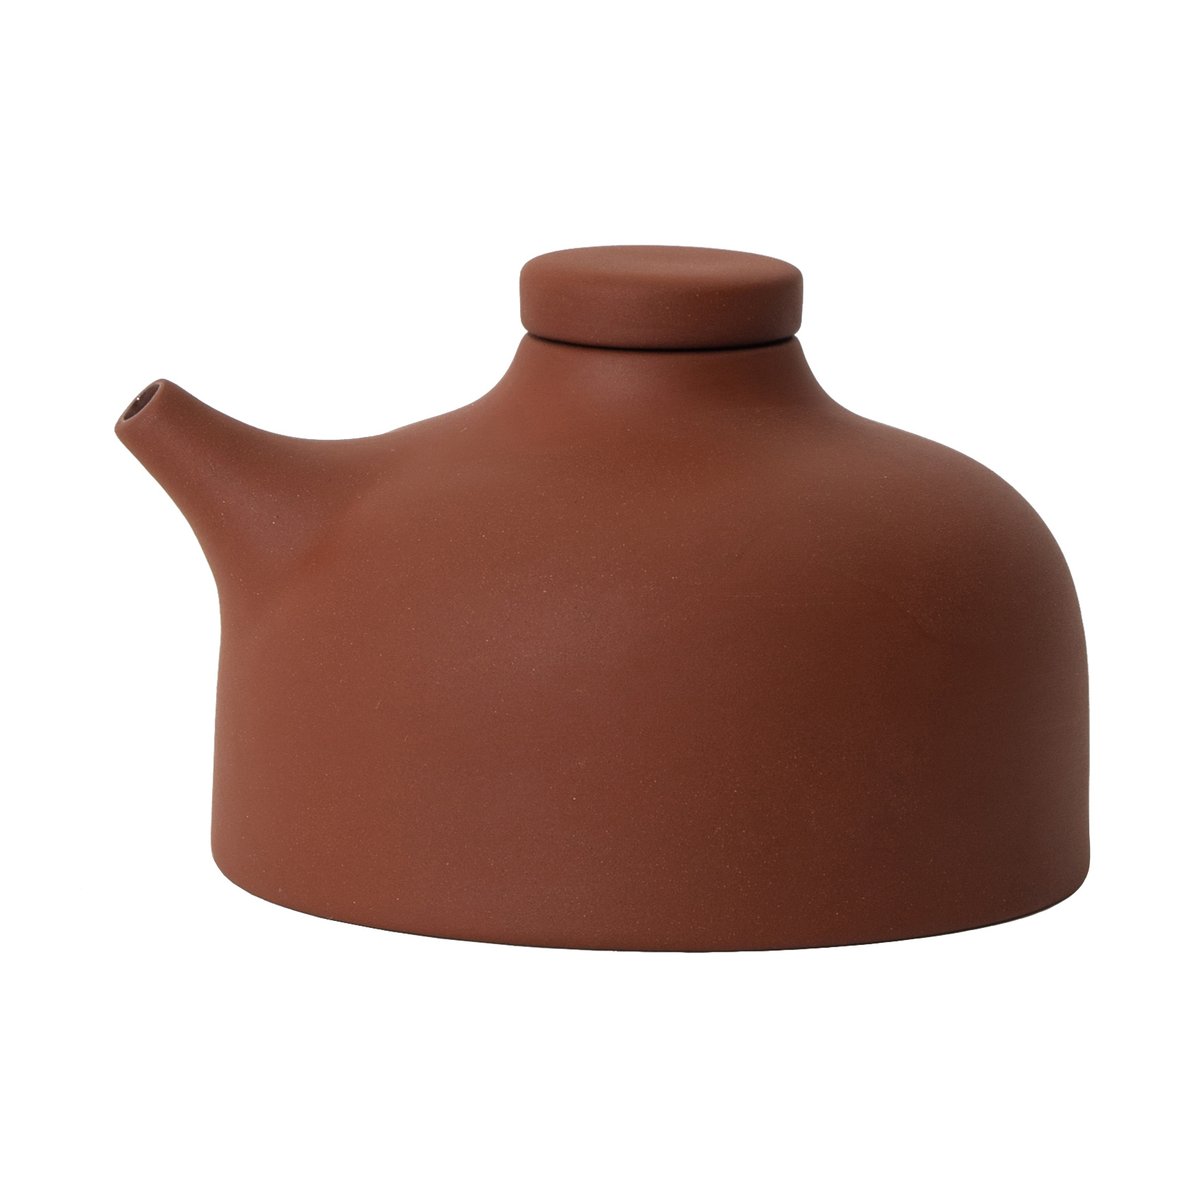 Design House Stockholm Sand soijakannu 12 cl Red clay